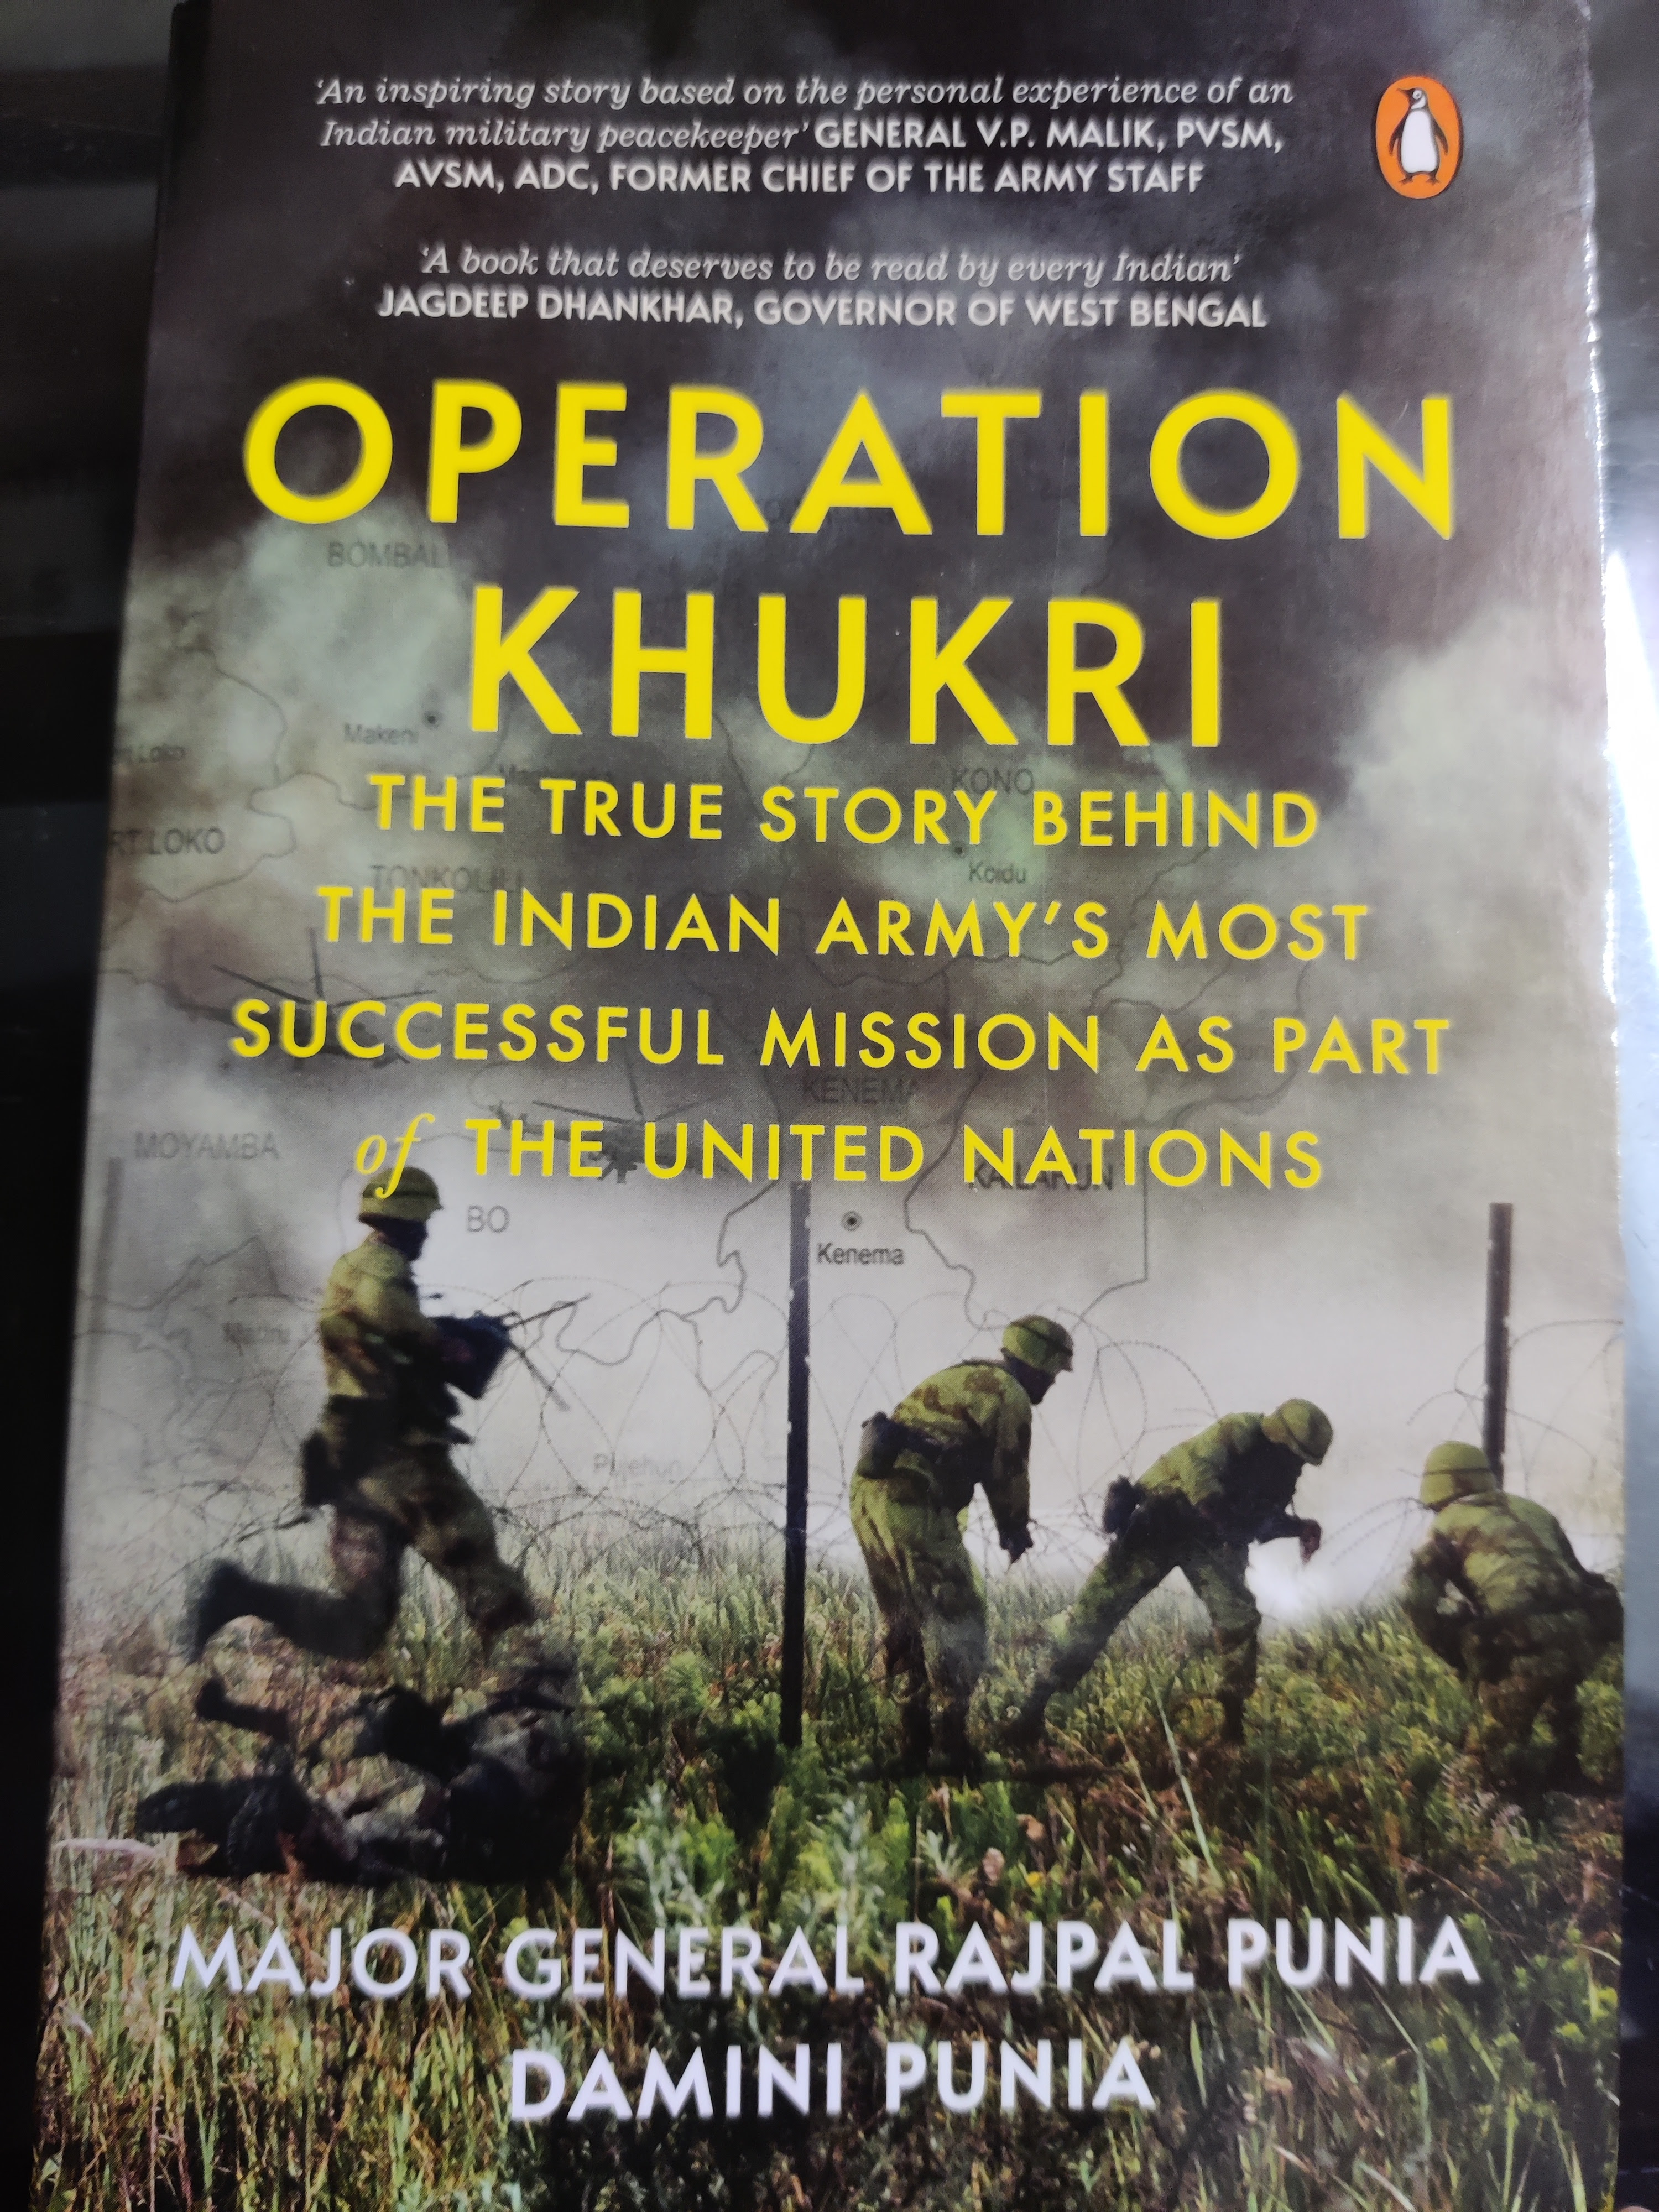 Operation Khukri: The True Story behind the Indian Army's Most Successful Mission as part of the United Nations in Kindle/PDF/EPUB